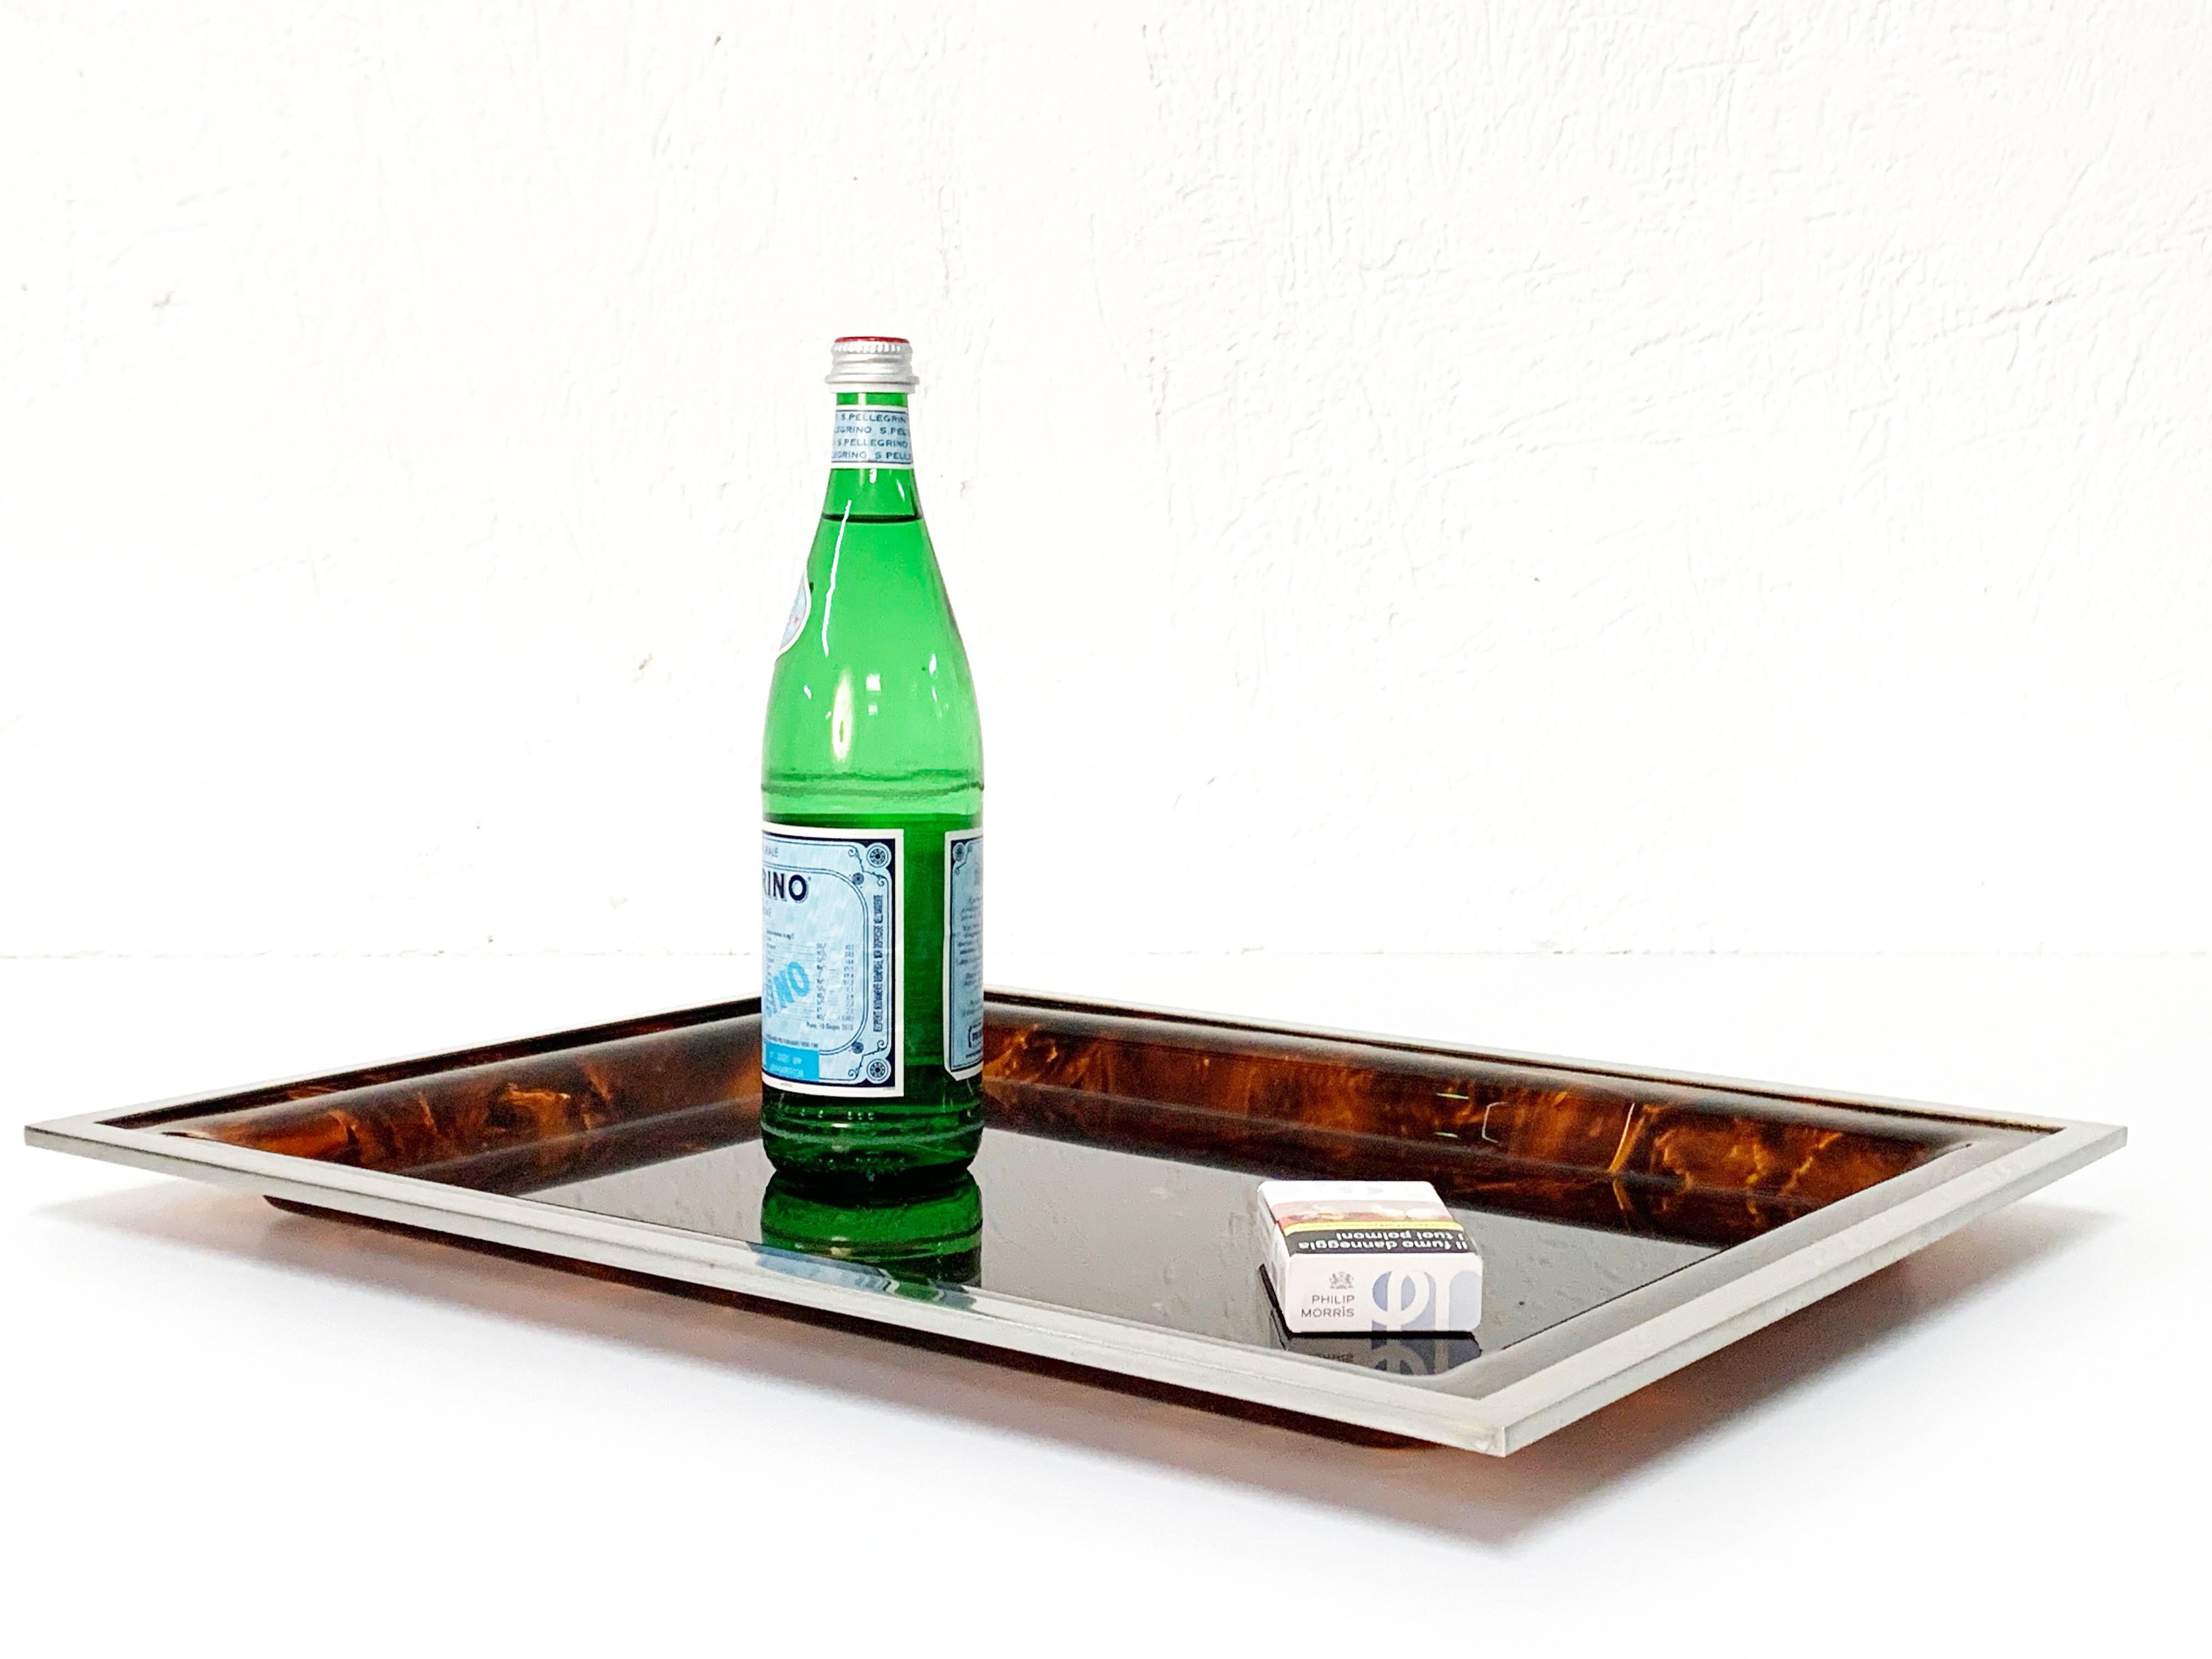 Acrylic Midcentury Tortoiseshell and Lucite Italian Serving Tray after Willy Rizzo 1970s